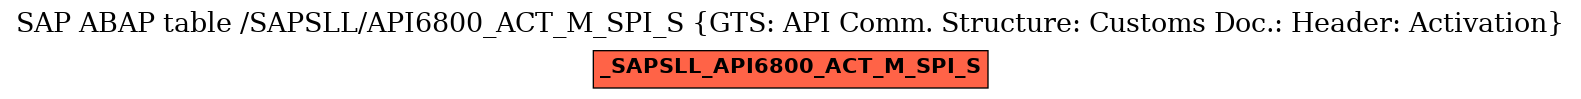 E-R Diagram for table /SAPSLL/API6800_ACT_M_SPI_S (GTS: API Comm. Structure: Customs Doc.: Header: Activation)